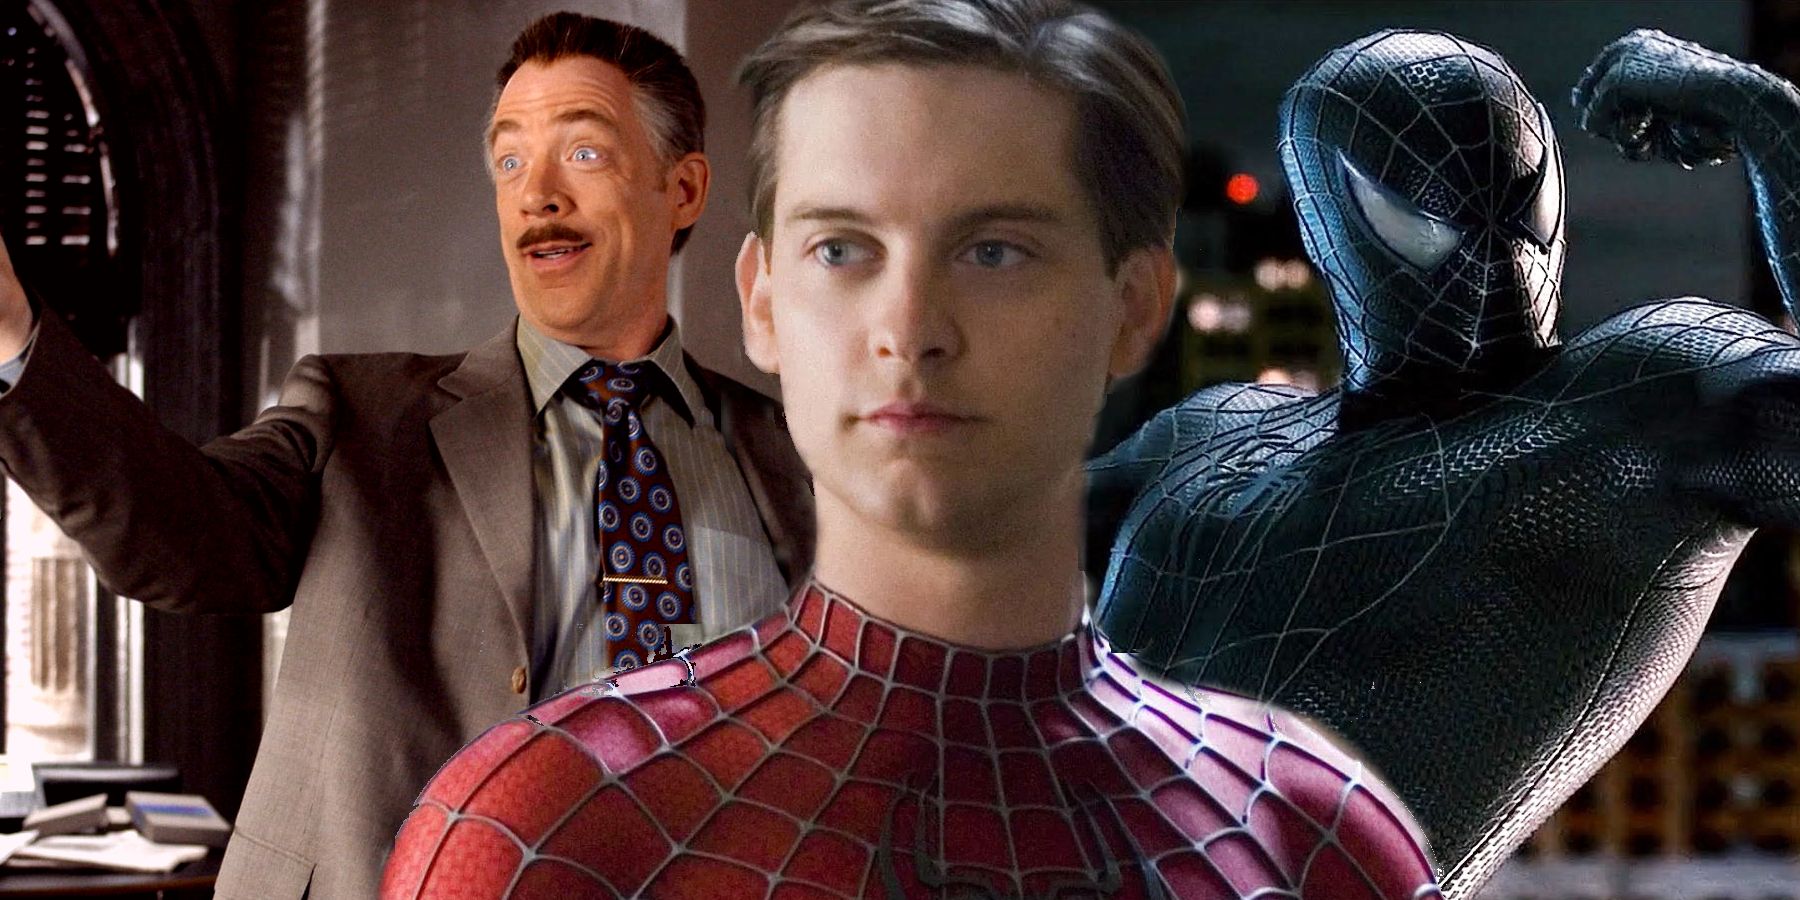 Tobey Maguire Spider-Man with a background of JK Simmons as J Jonah Jameson and the Black Suit Spider-Man